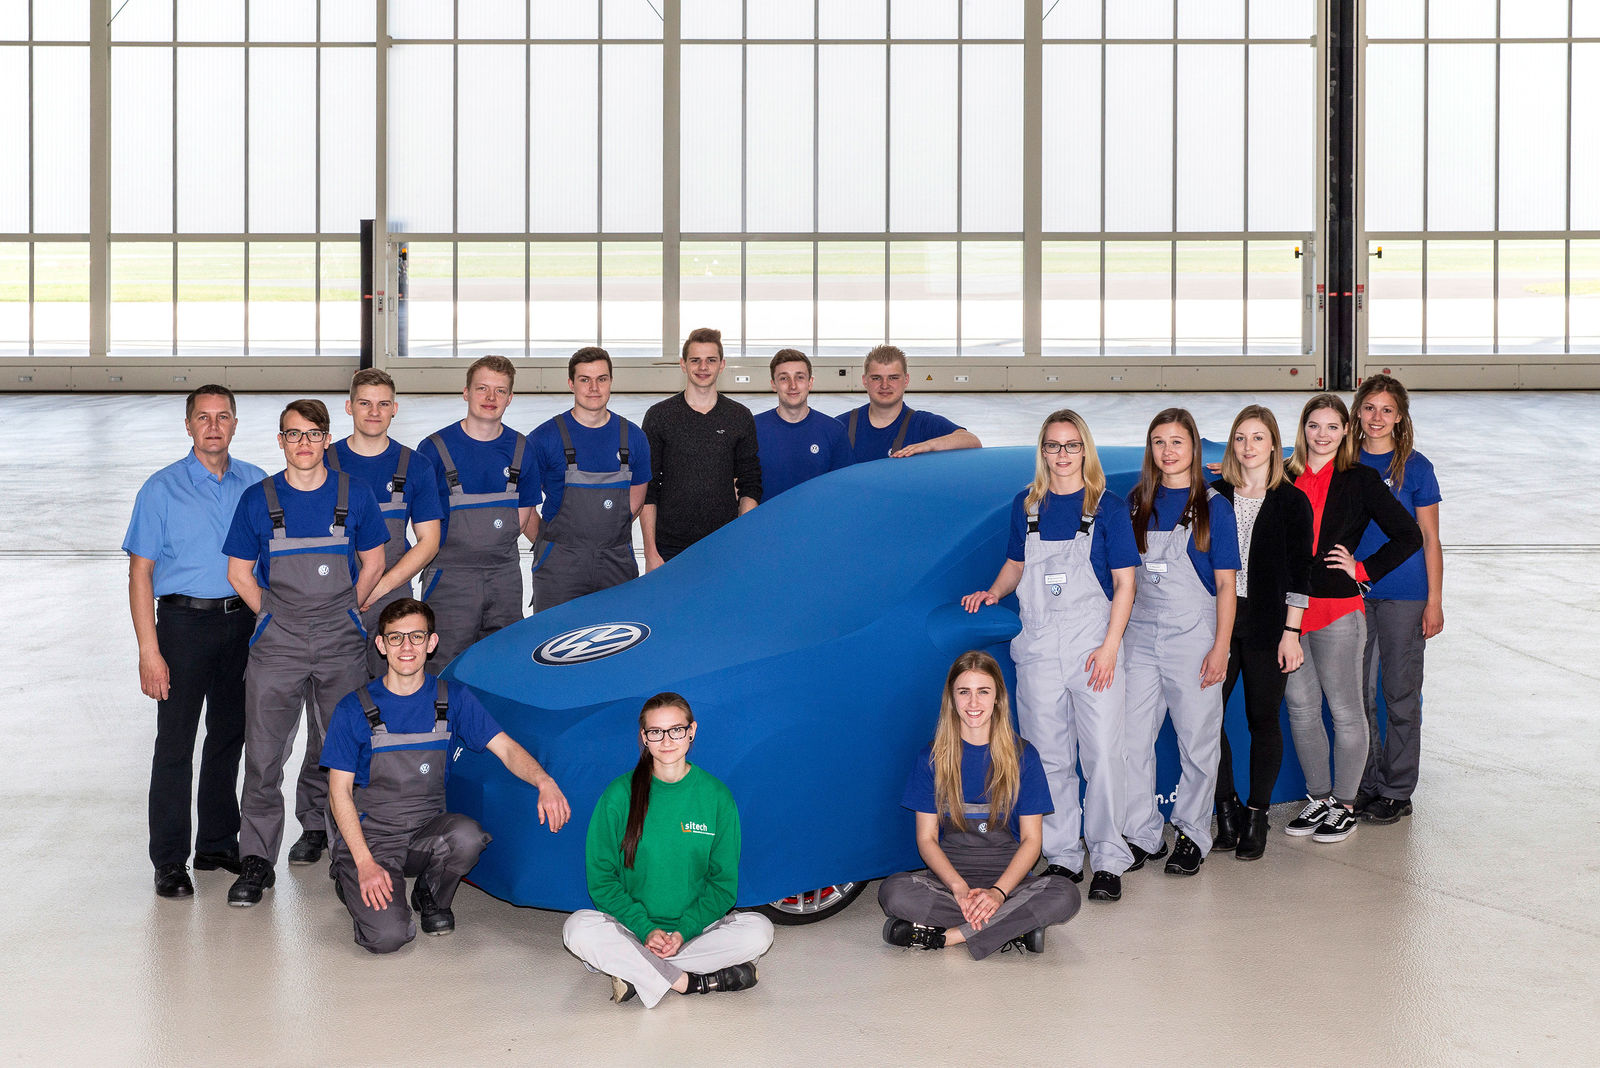 Double Premiere at the 37th GTI meeting – apprentices from Wolfsburg and Zwickau present their showcars